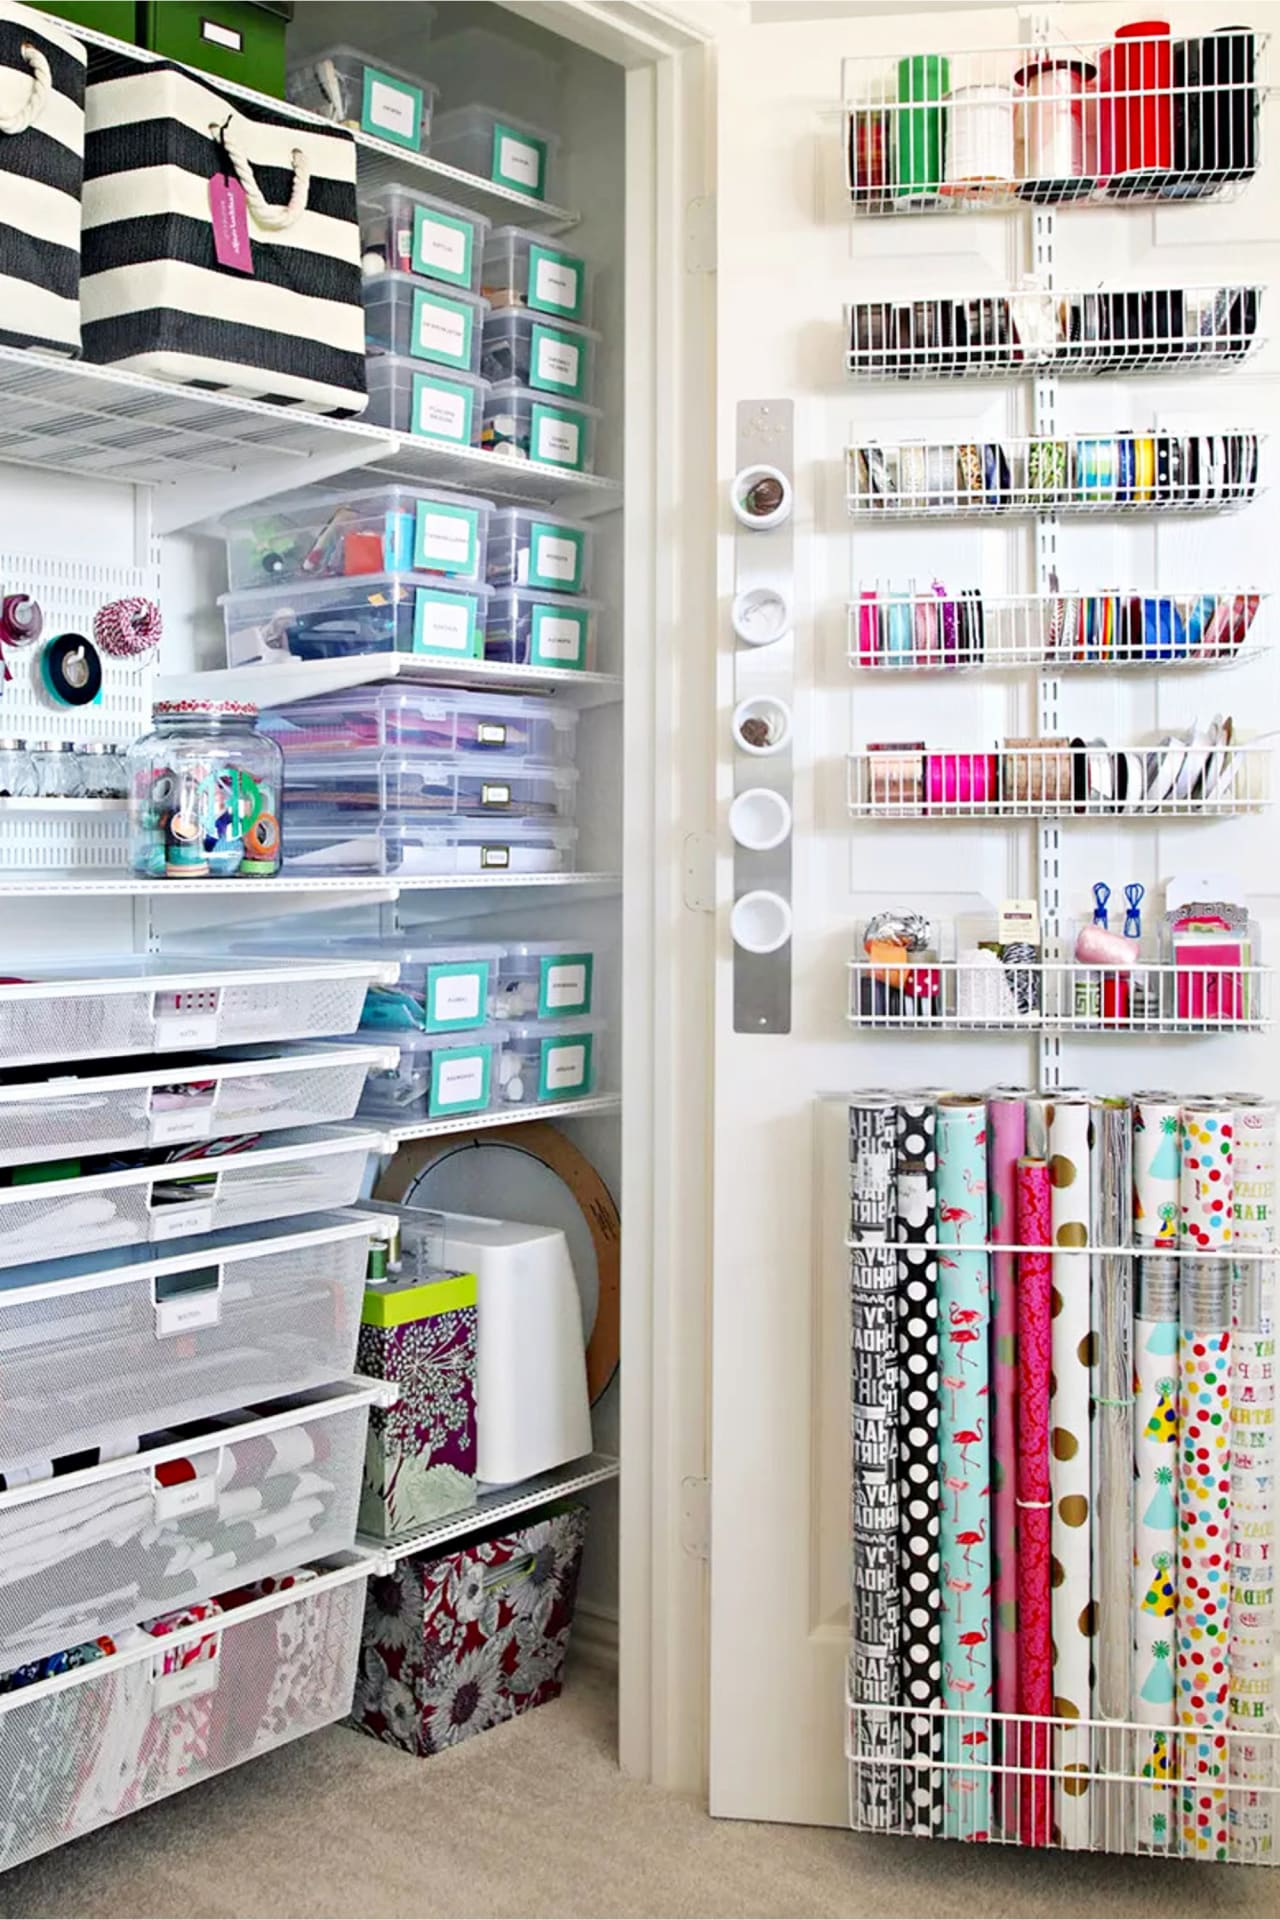 Craft room organization ideas on a budget - Dollar Store craft room closet organizing ideas for creative craft supplies sotrage even in small spaces - DIY craft room organization ideas on a budget and more creative craft room ideas